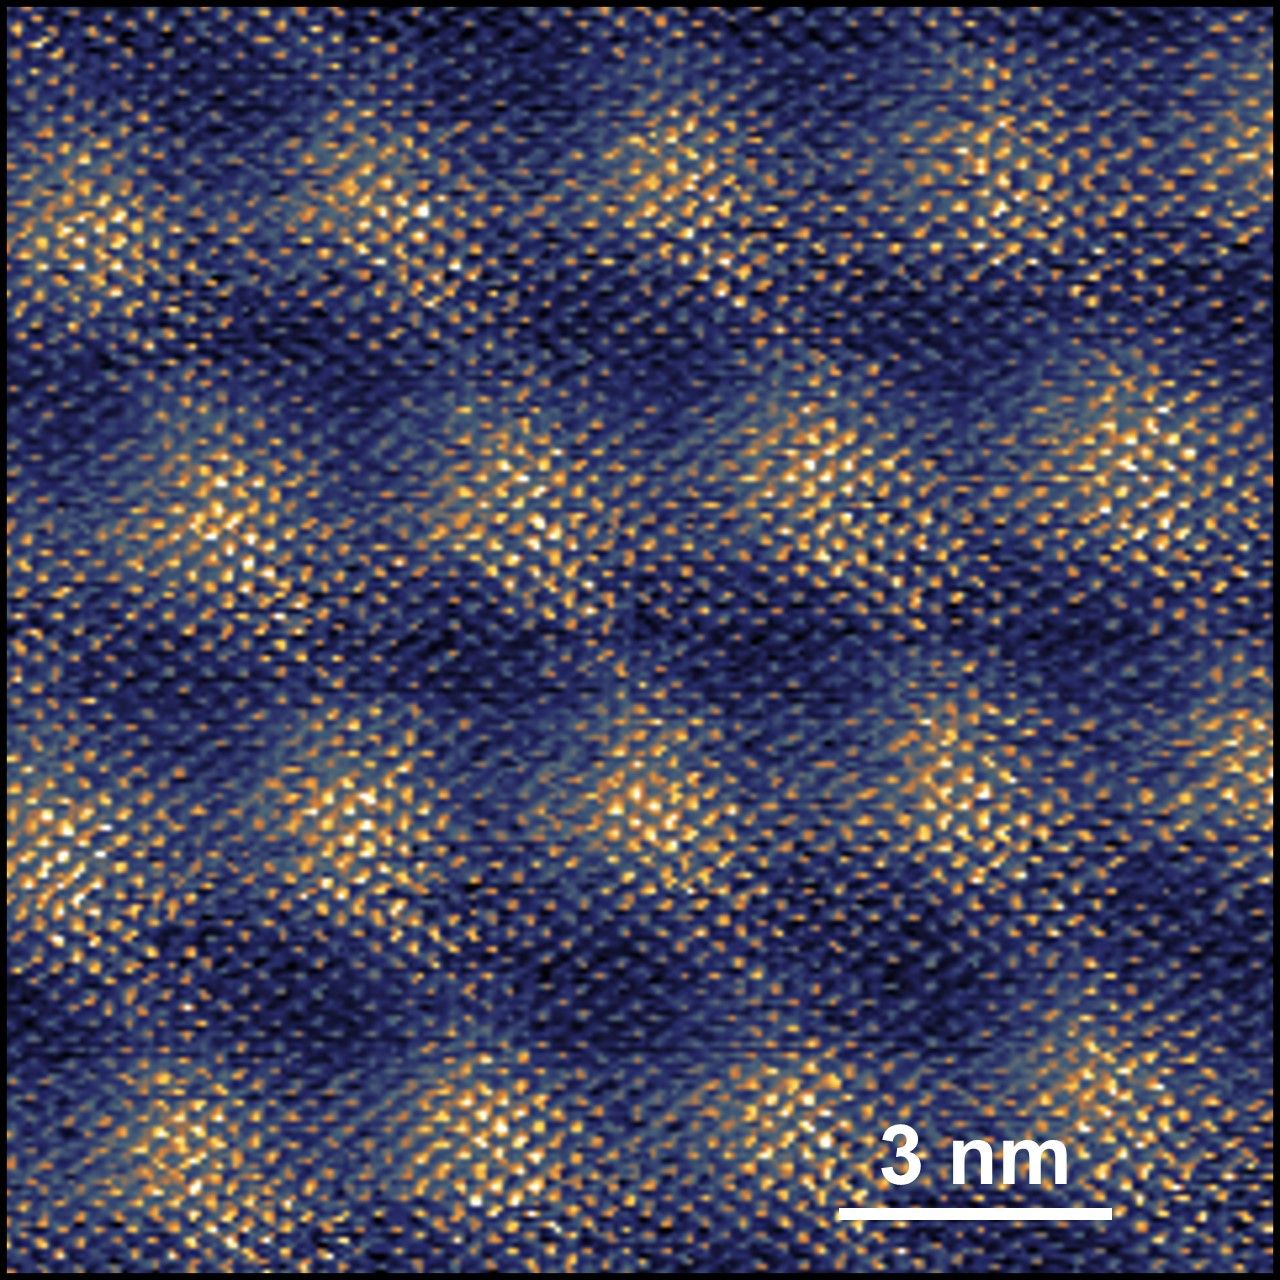 Image: Atomic-resolution moiré patterns imaged on a twisted graphite-graphite interface, recorded via conductive atomic force microscopy under ambient conditions. Image by the Baykara Lab.